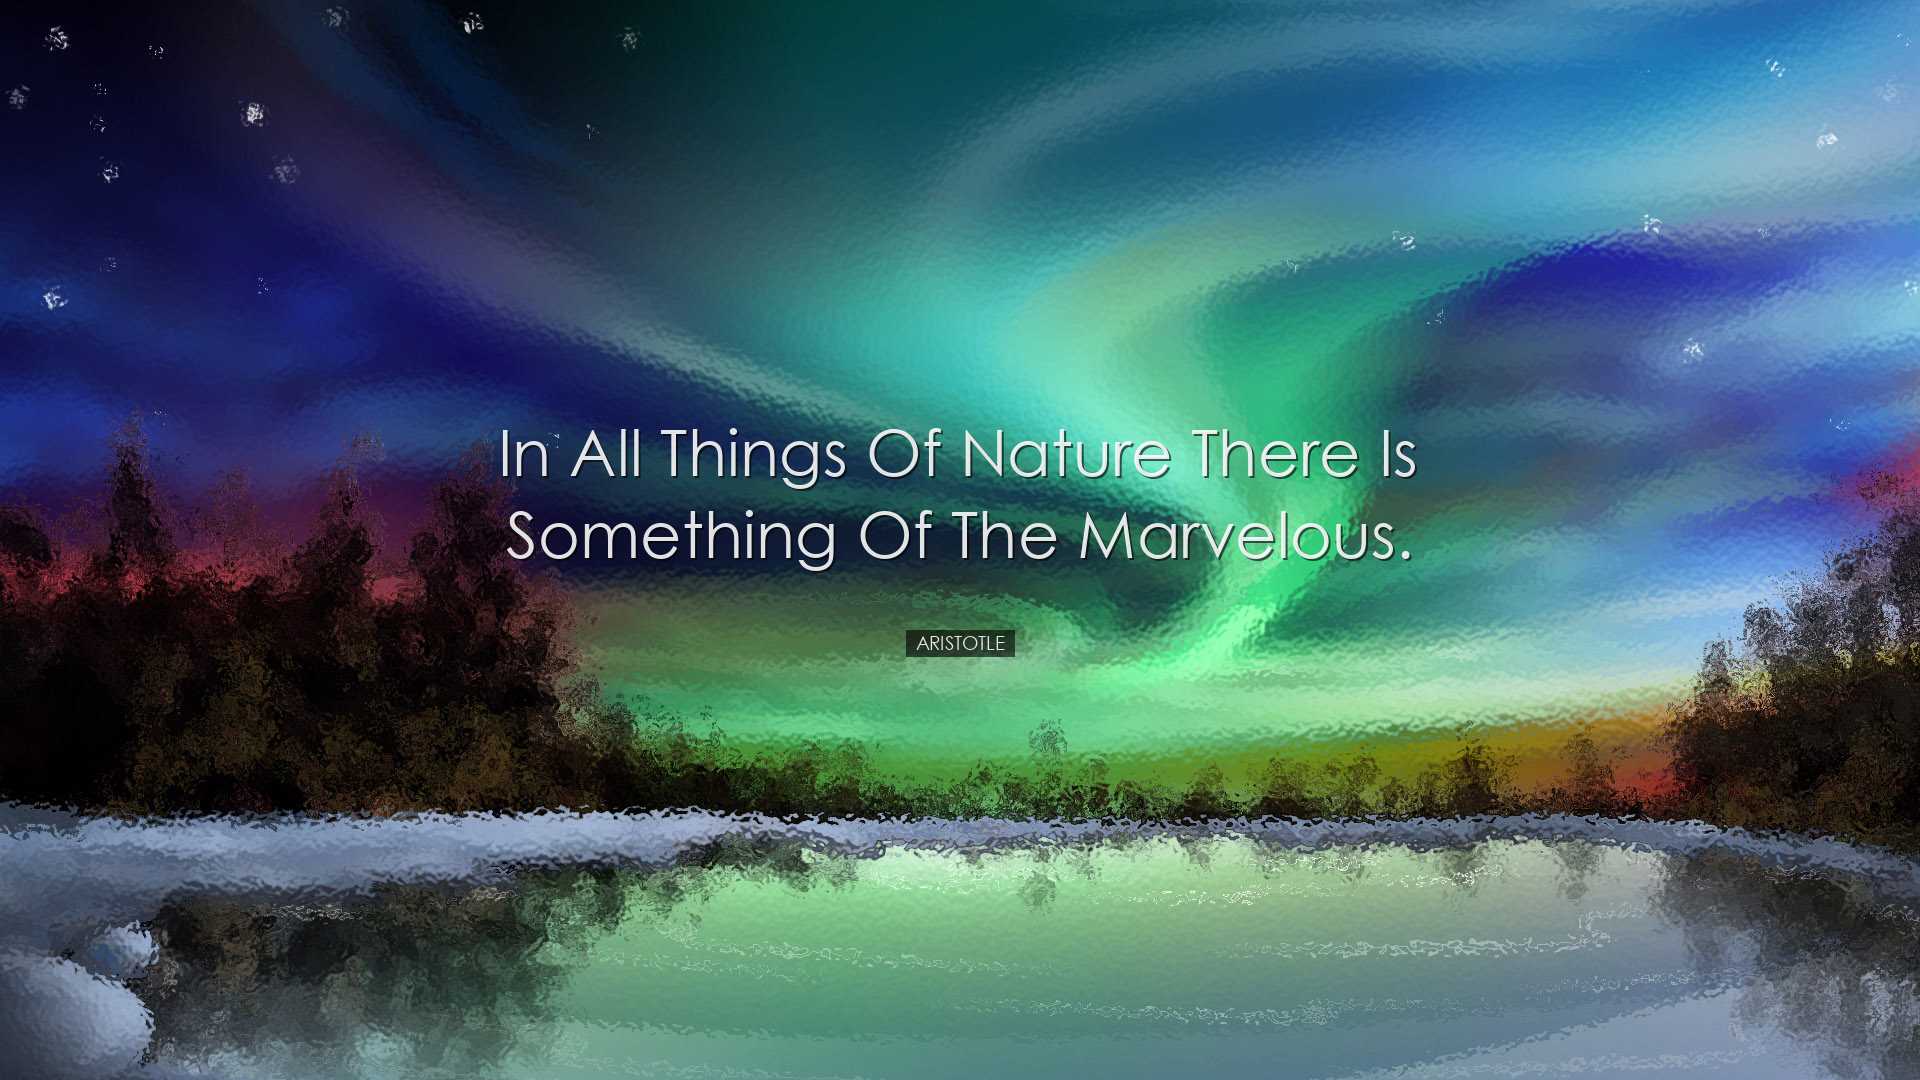 In all things of nature there is something of the marvelous. - Ari